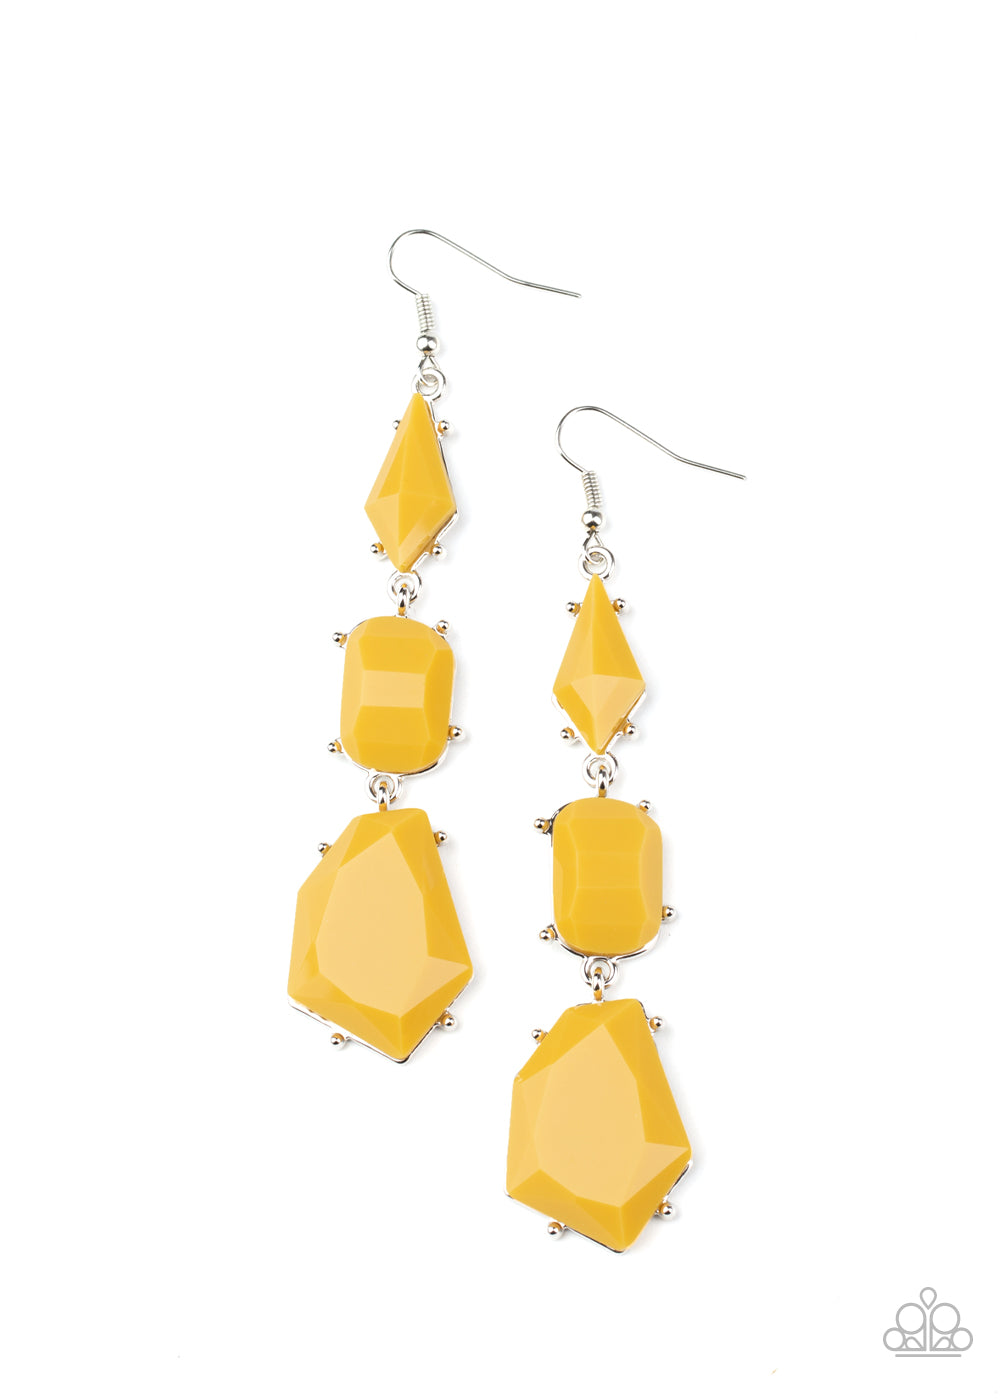 &lt;P&gt;Varying in shape, imperfectly faceted yellow beads are encased in studded silver frames as they delicately link into a colorful lure. Earring attaches to a standard fishhook fitting.&lt;/P&gt;  

&lt;P&gt; &lt;I&gt;  Sold as one pair of earrings. &lt;/I&gt;  &lt;/P&gt;

&lt;img src=\&quot;https://d9b54x484lq62.cloudfront.net/paparazzi/shopping/images/517_tag150x115_1.png\&quot; alt=\&quot;New Kit\&quot; align=\&quot;middle\&quot; height=\&quot;50\&quot; width=\&quot;50\&quot;/&gt;